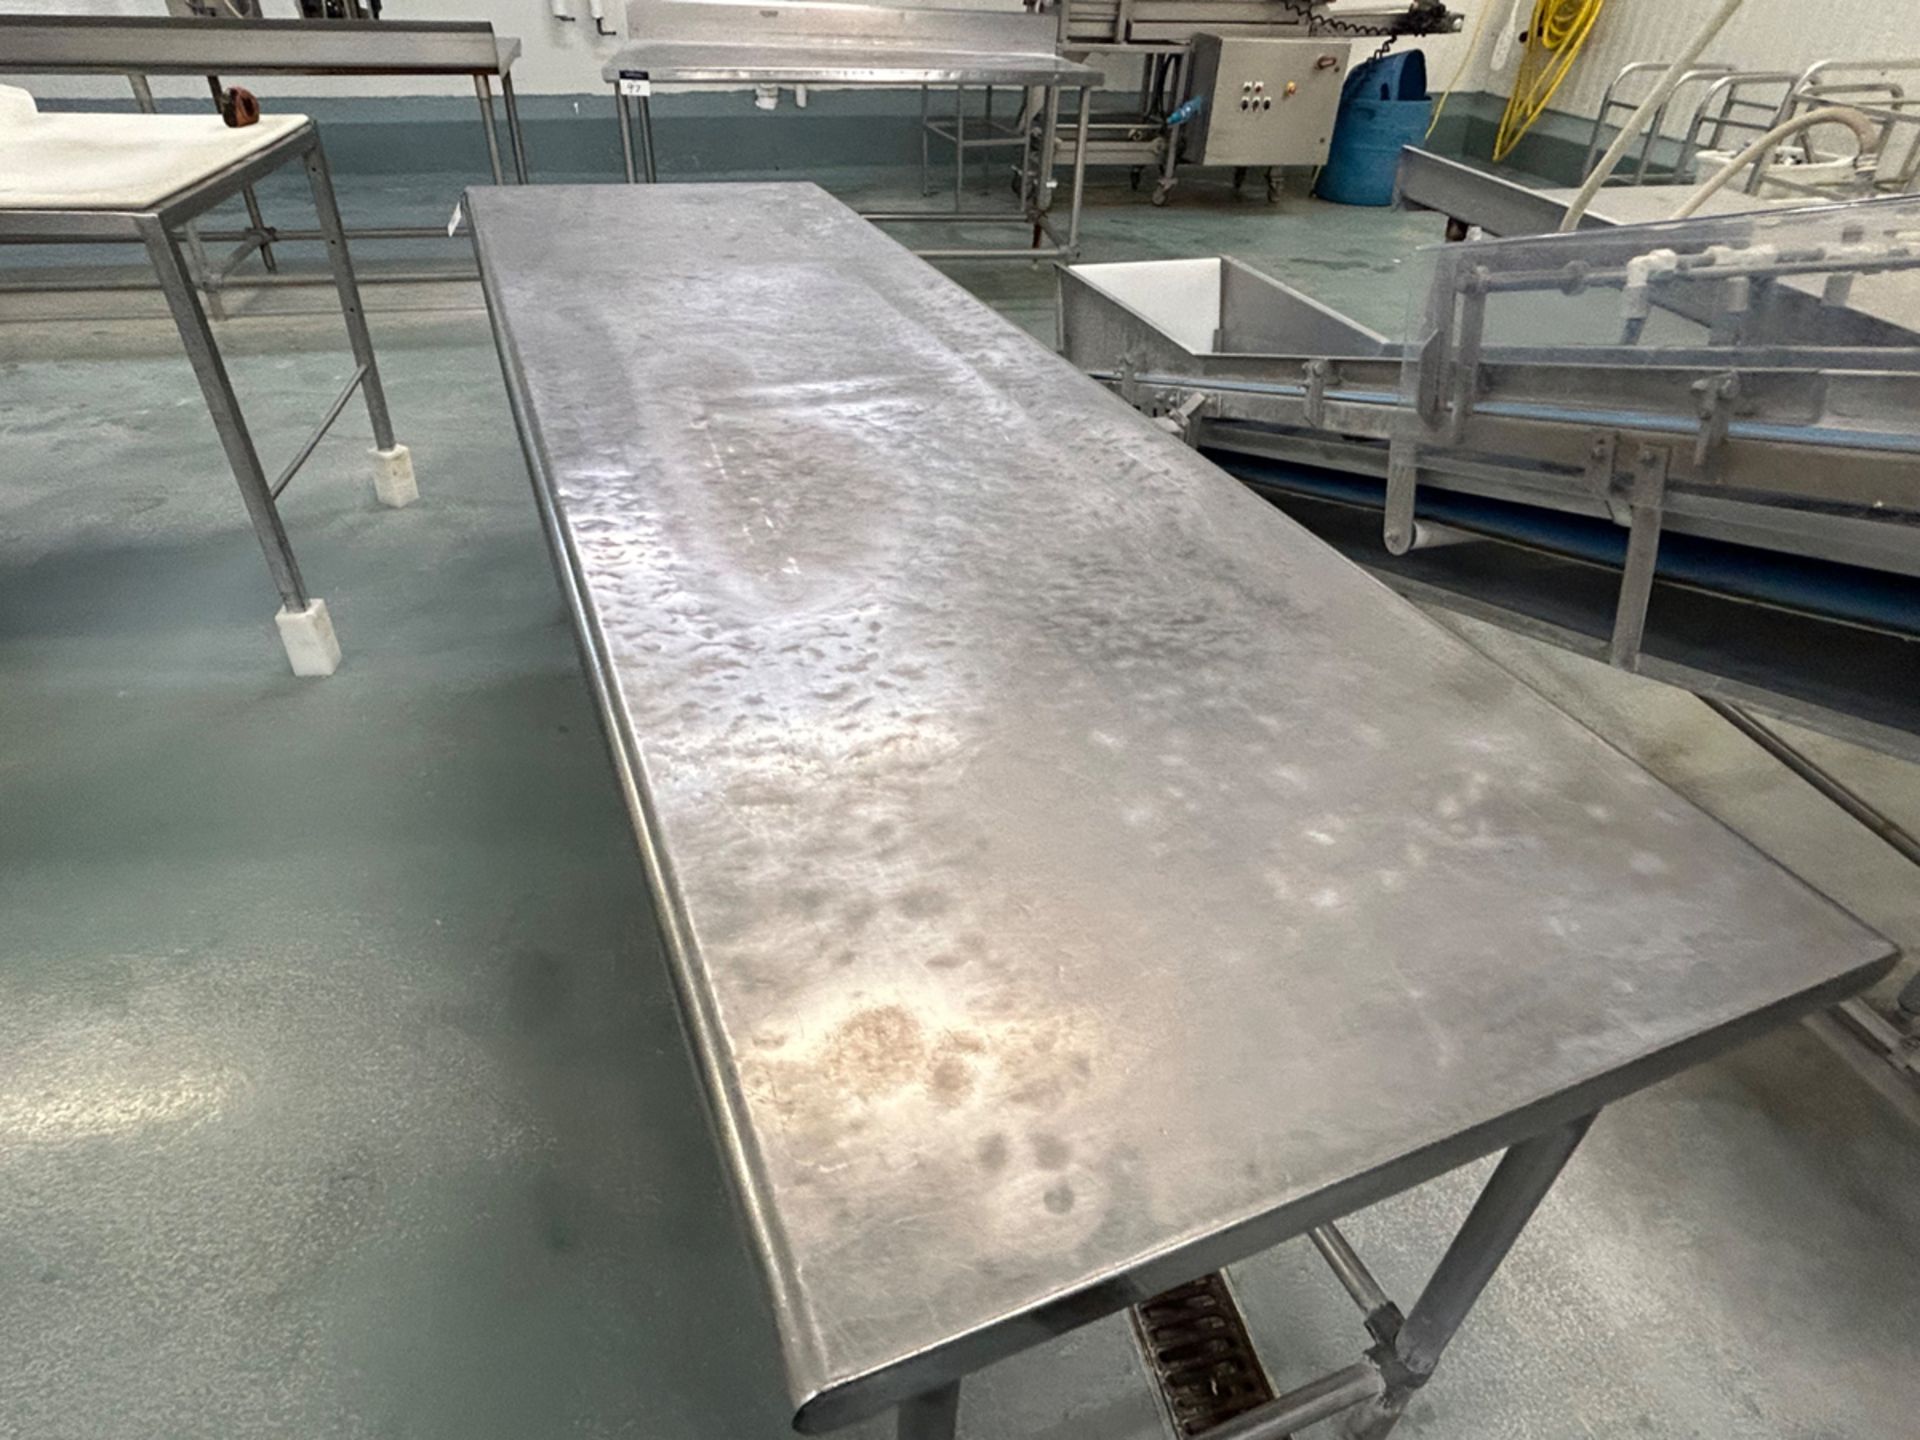 Stainless Steel Table - Image 2 of 2